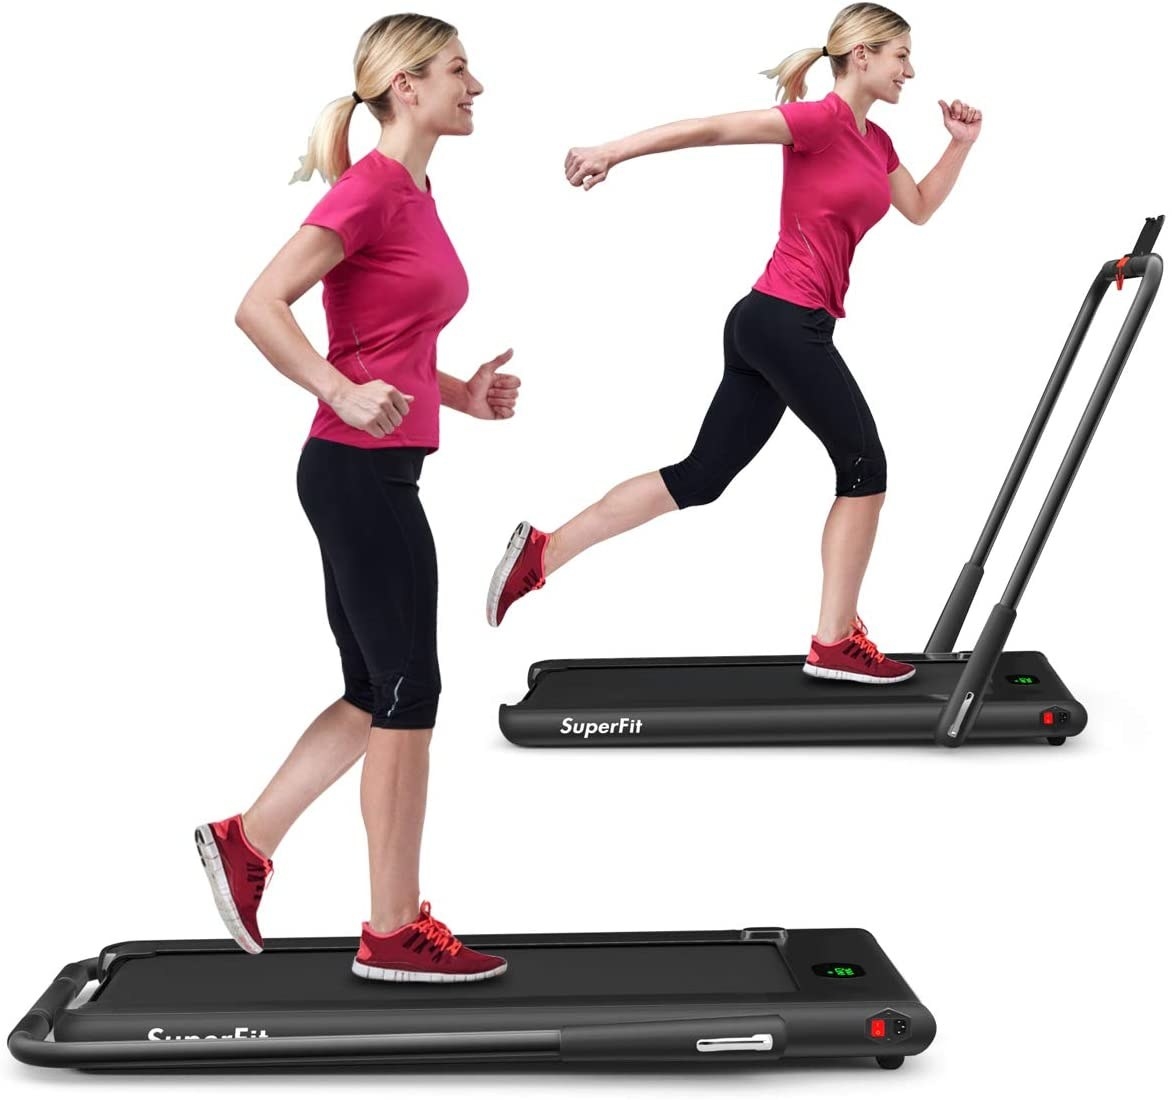 model running on a treadmill and on a converted version for a desk